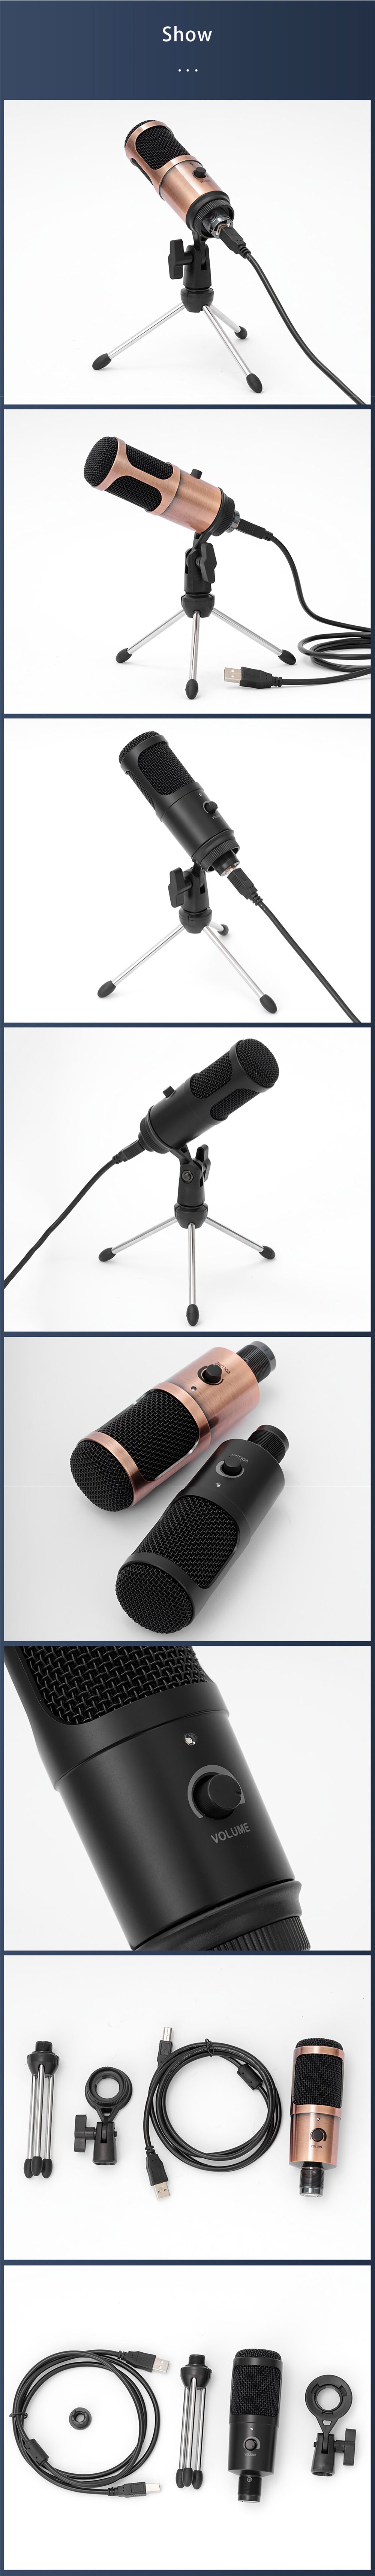 YR-K1-USB-Condenser-Microphone-Cardioid-directional-Computer-Karaoke-for-Recording-Singing-Game-Live-1678515